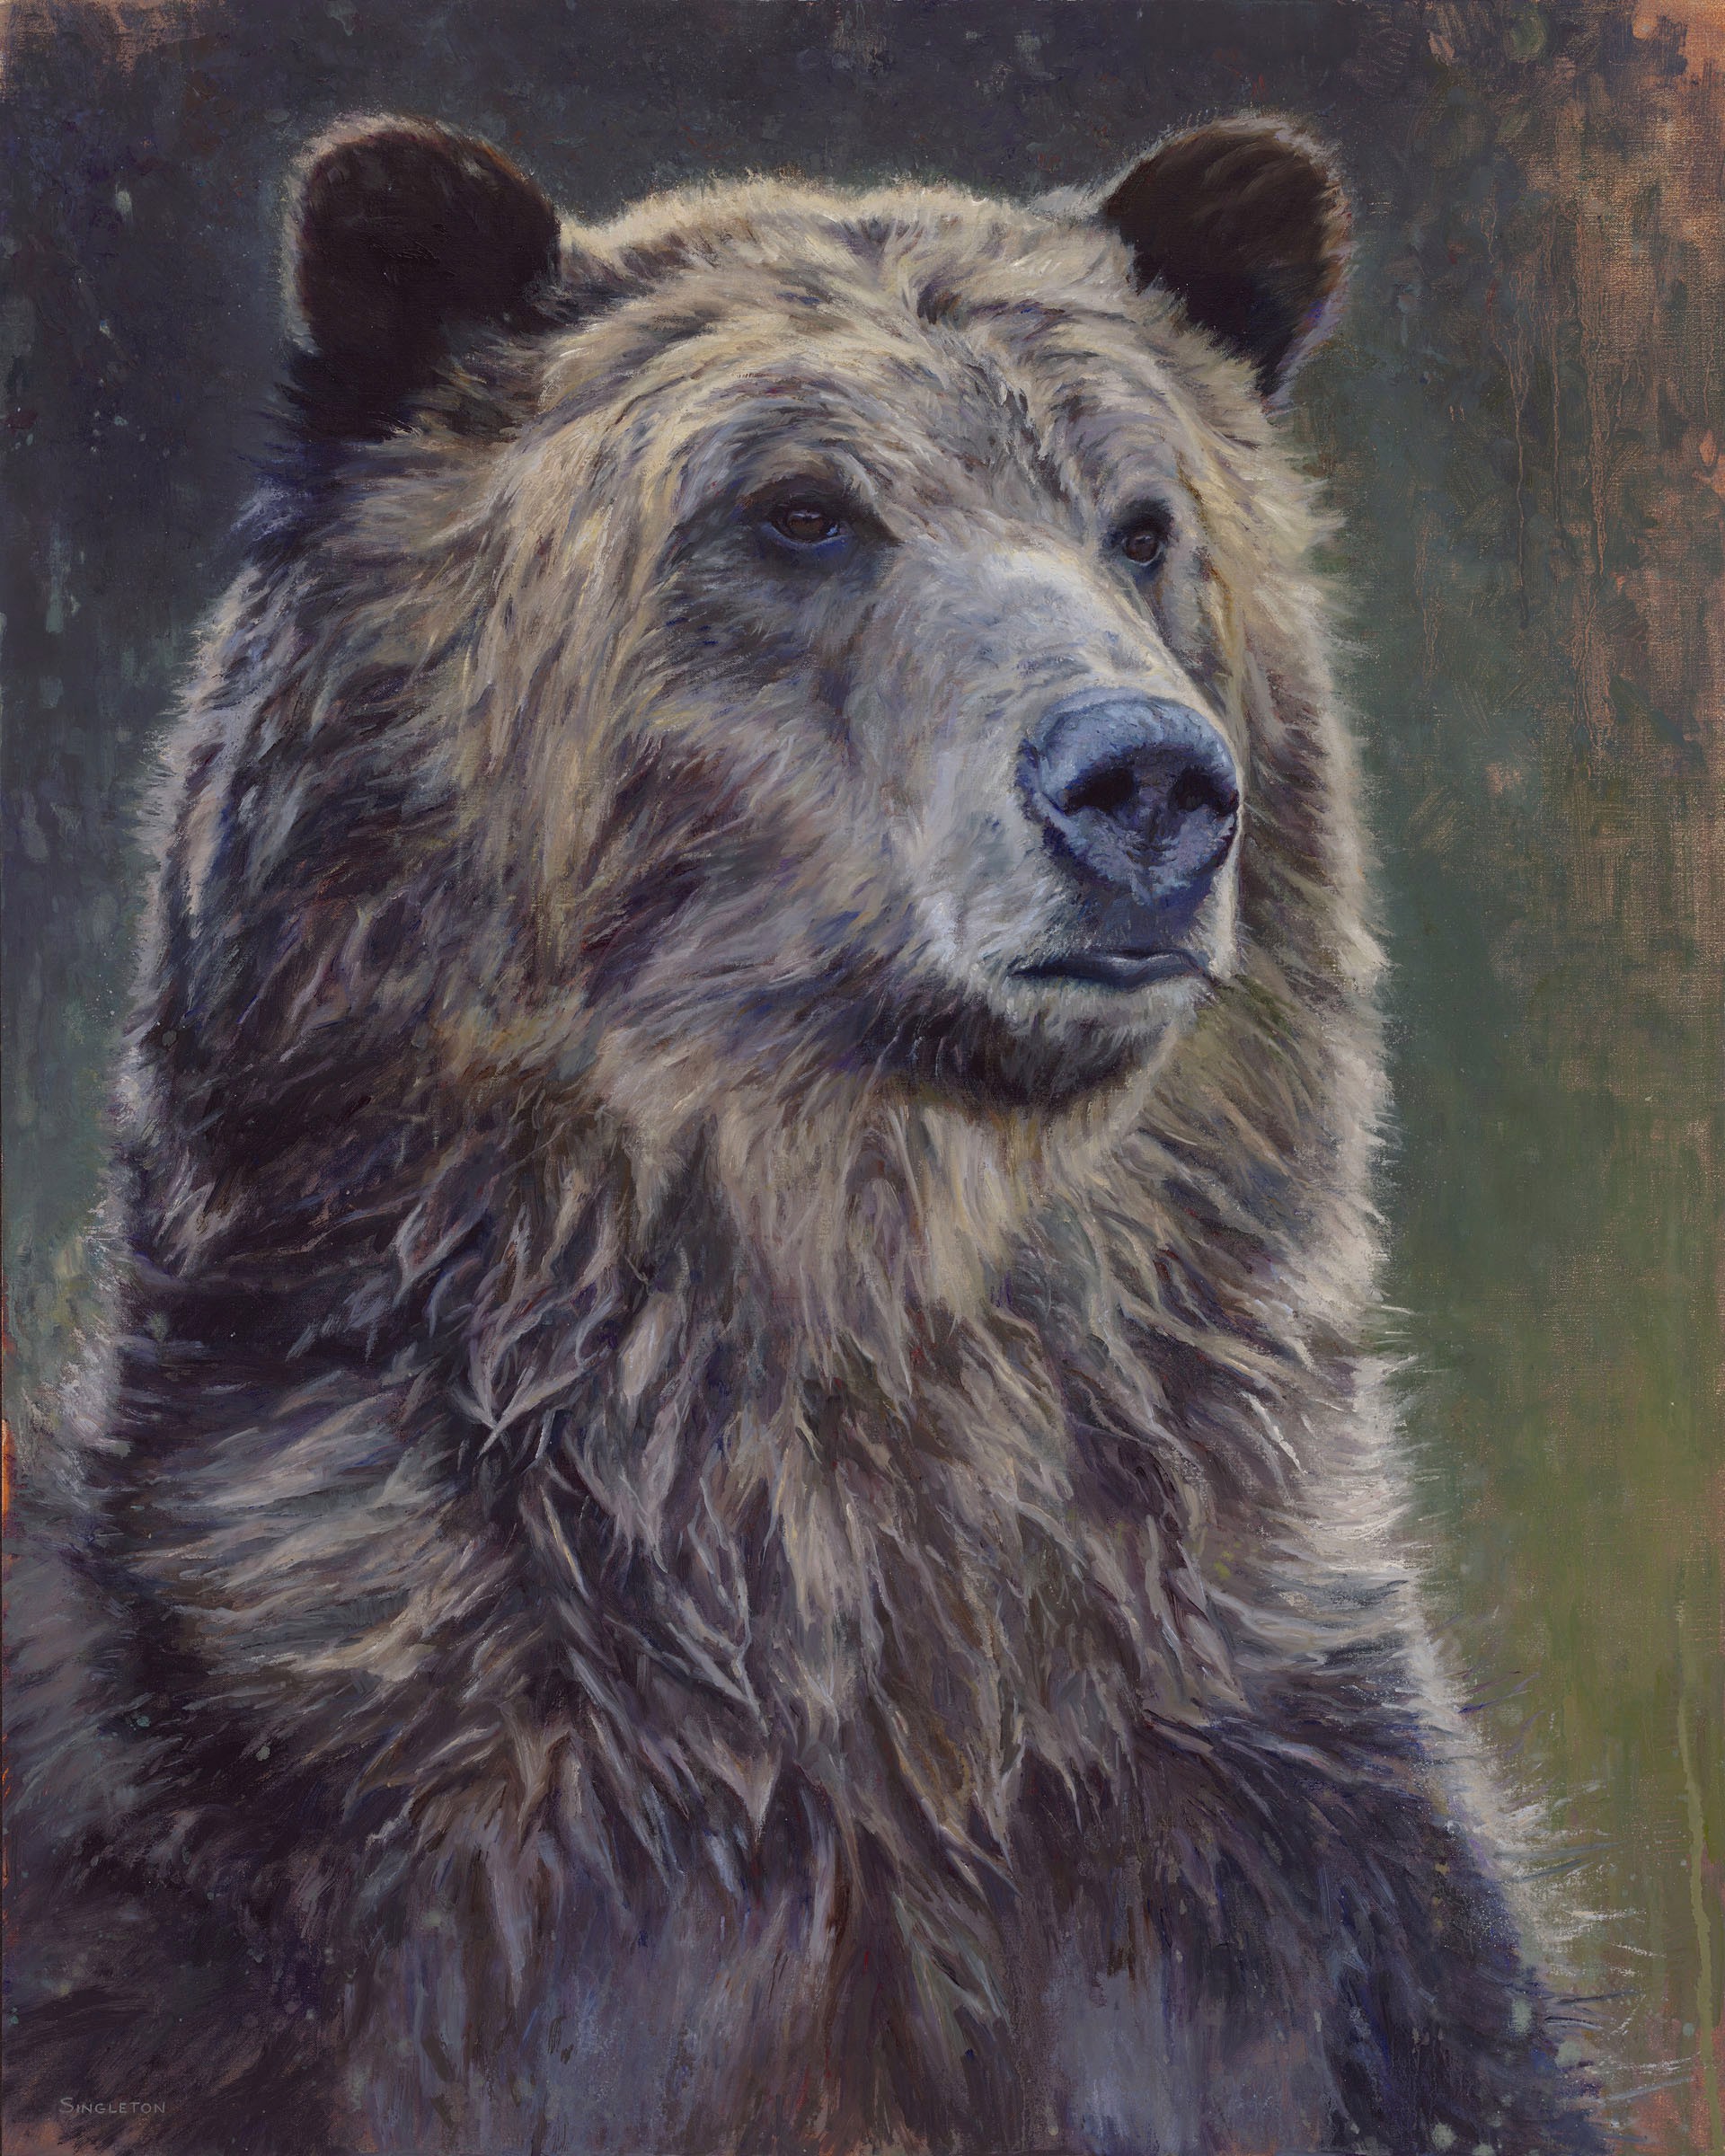 GRIZZLY: FEARED AND REVERED by Kelly Singleton